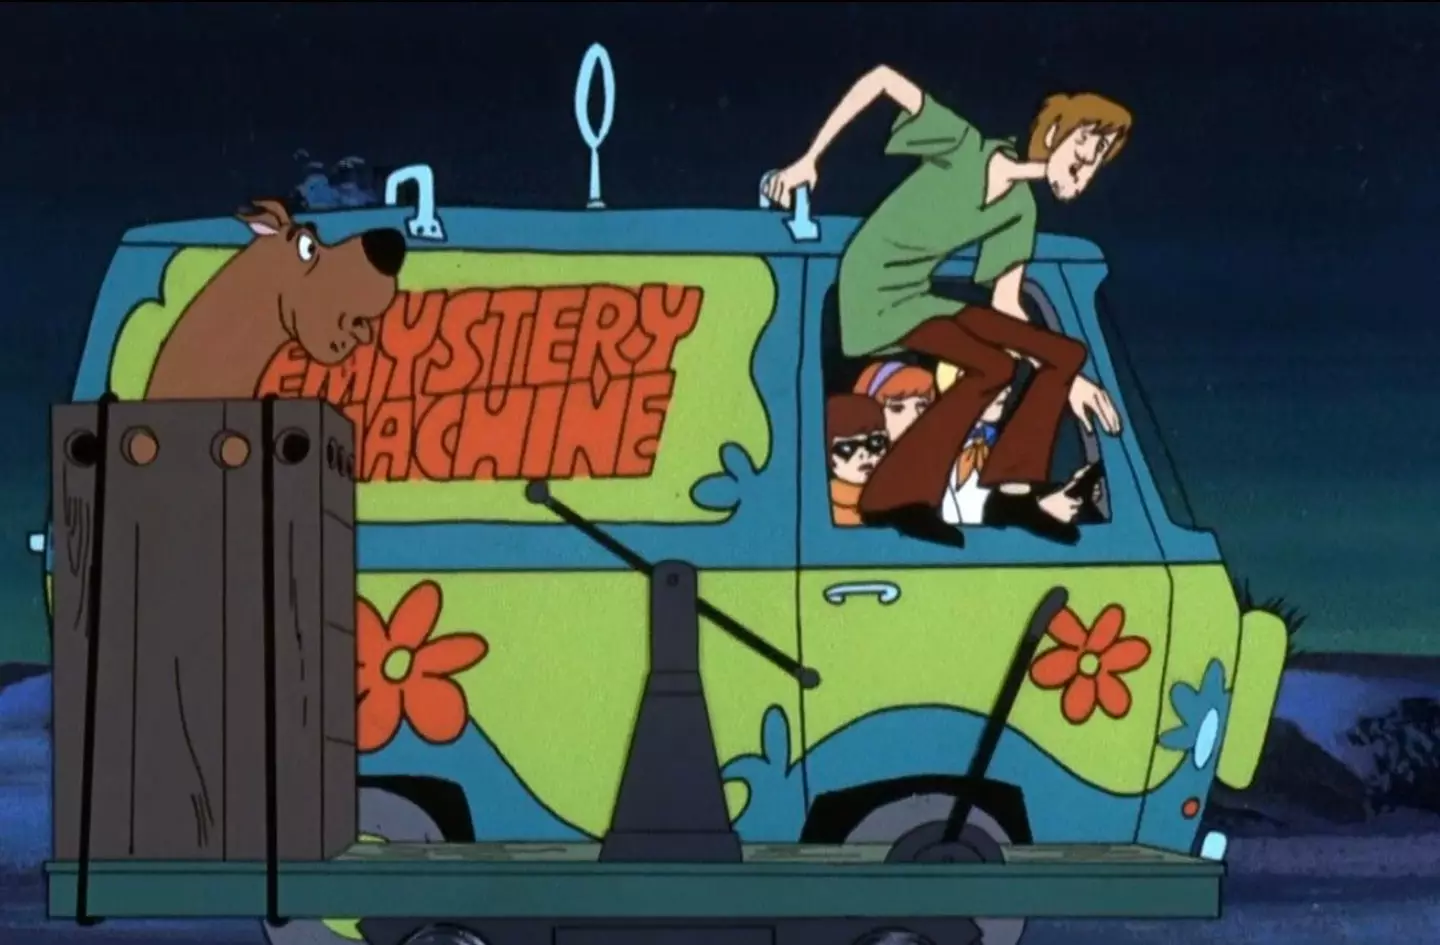 The teacher dressed up as the Mystery Machine from Scooby-Doo.